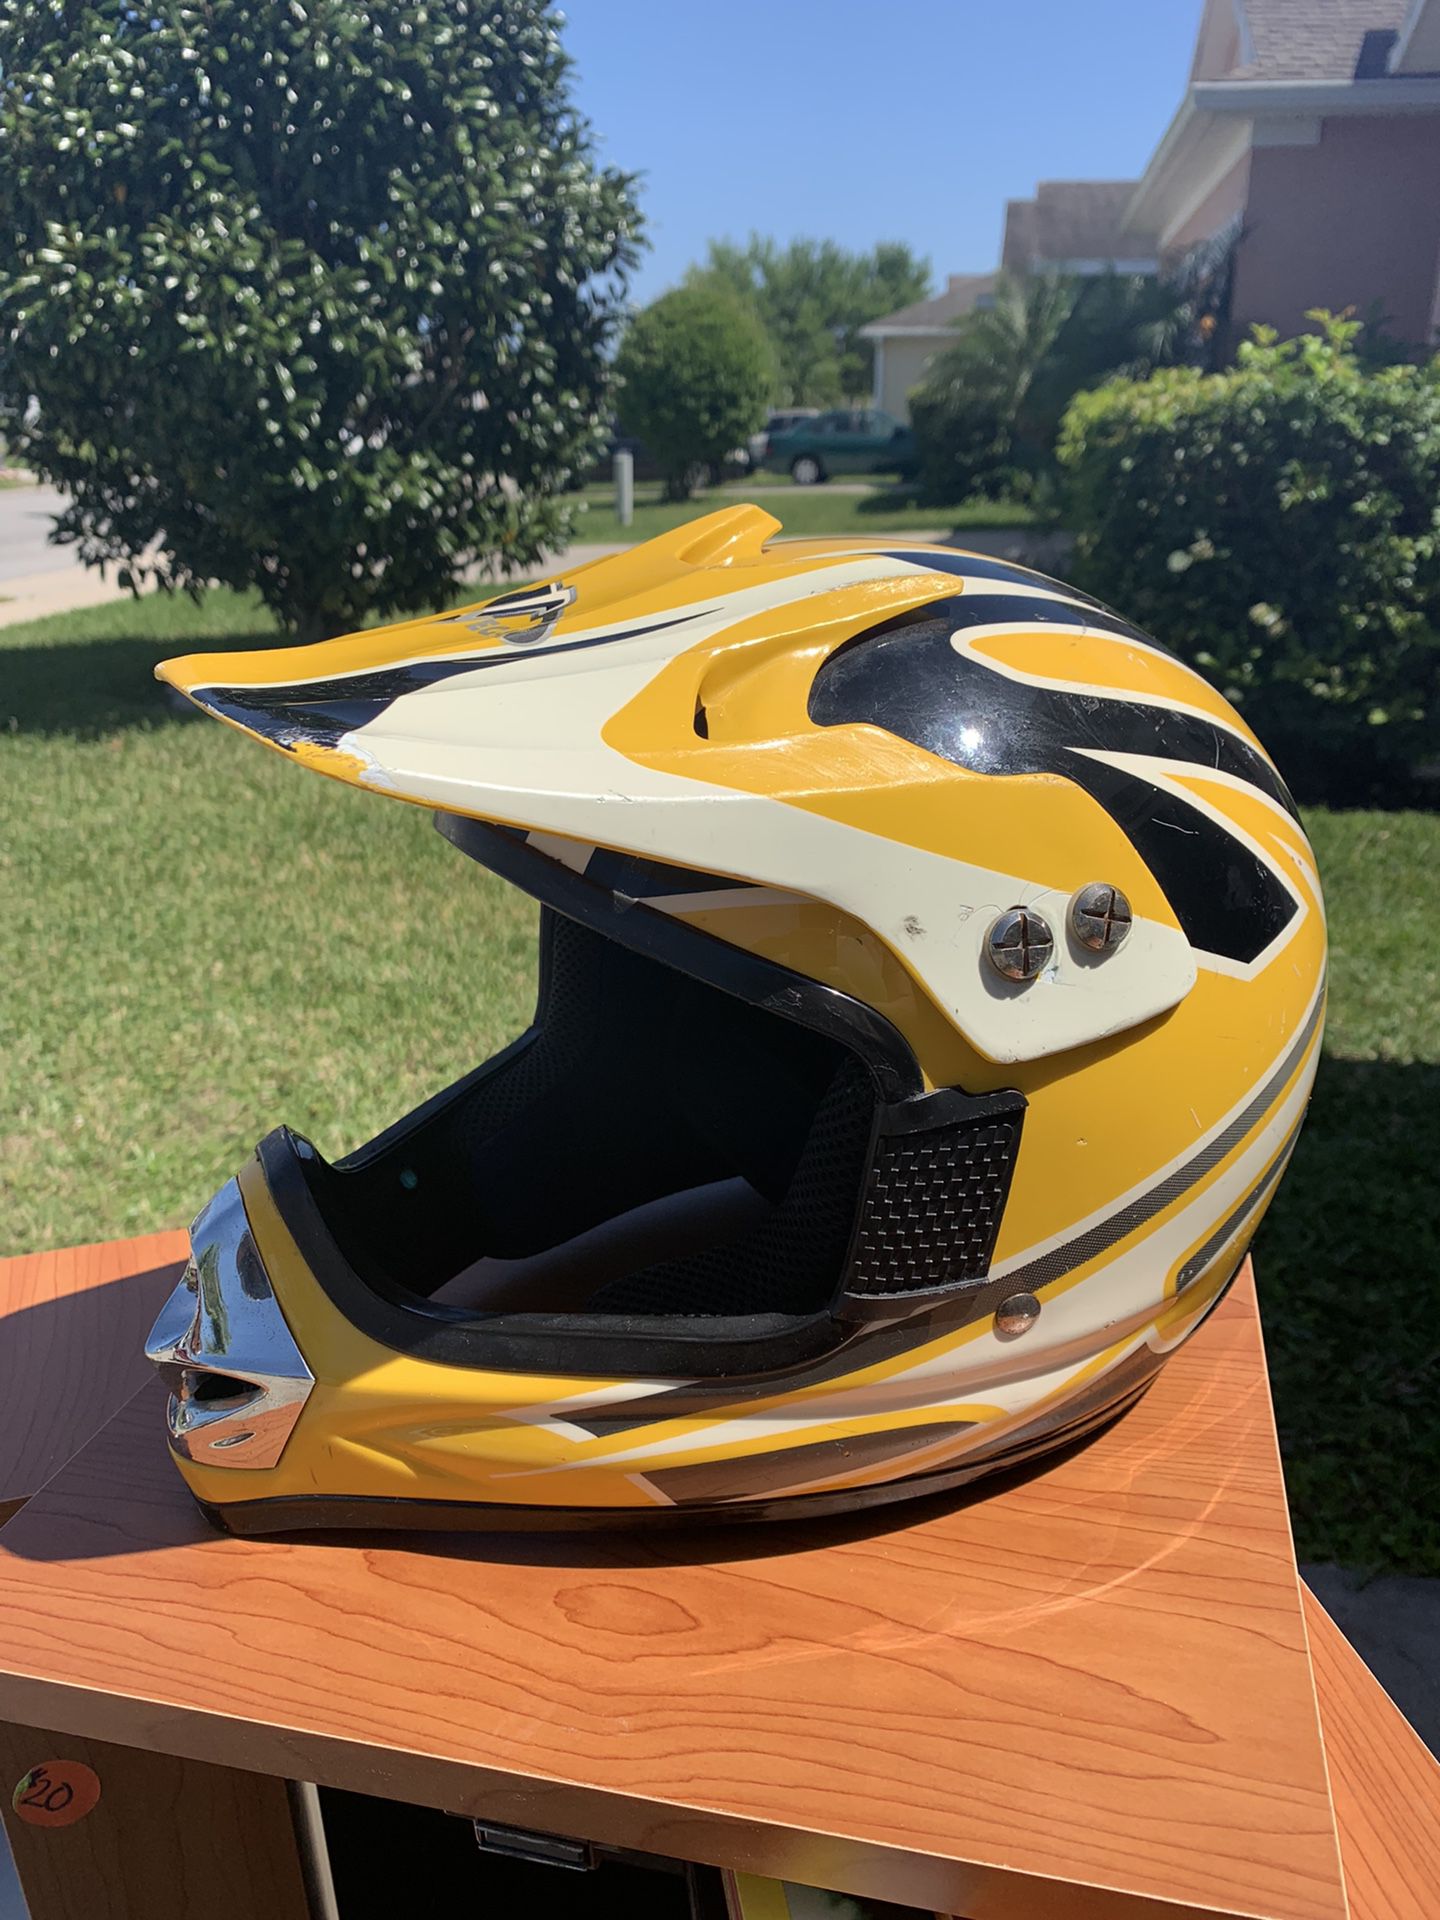 Helmet For Dirt Bike ! Some Scratches But Fair Condition